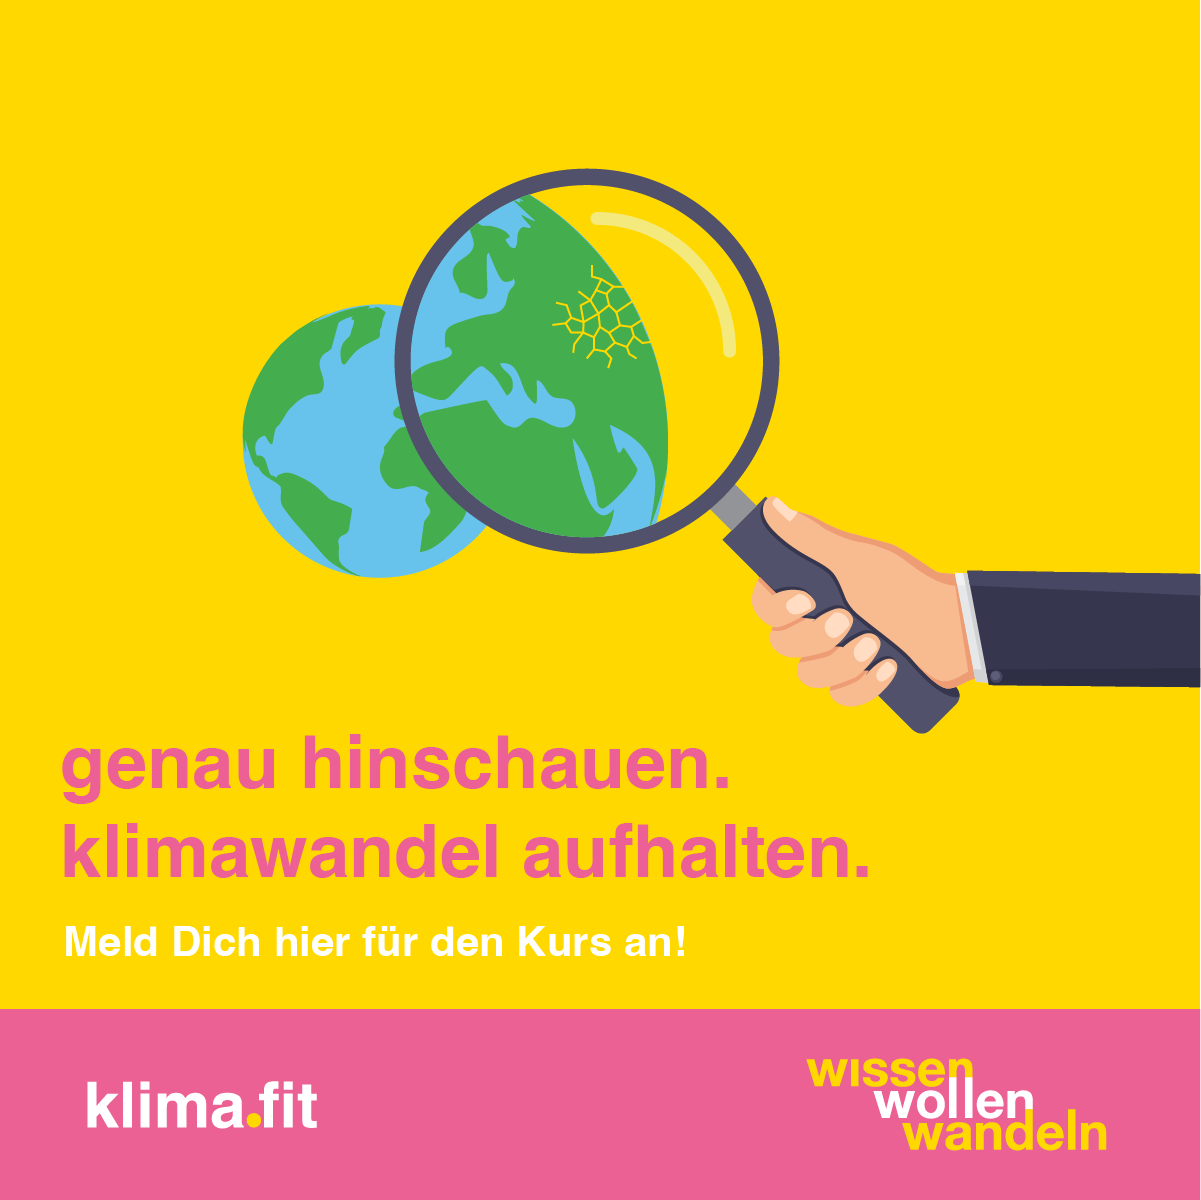 "Klimafit" course starts again from April at the Adult Education Center Stuttgart